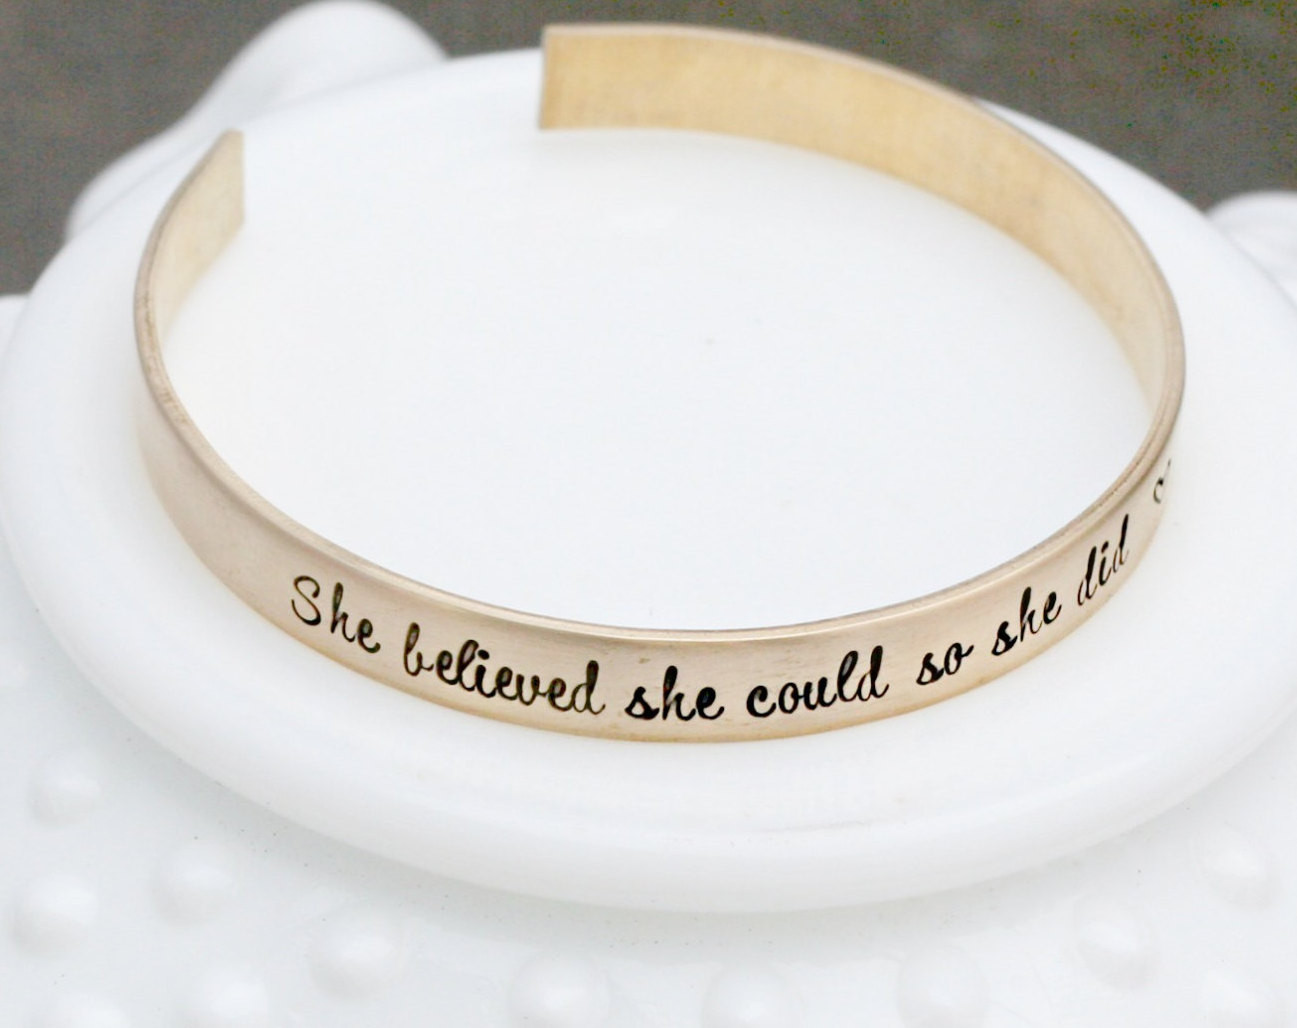 Inspirational Quote Bracelet
 Gold Cuff Bracelet Inspirational Saying Bracelet Quote